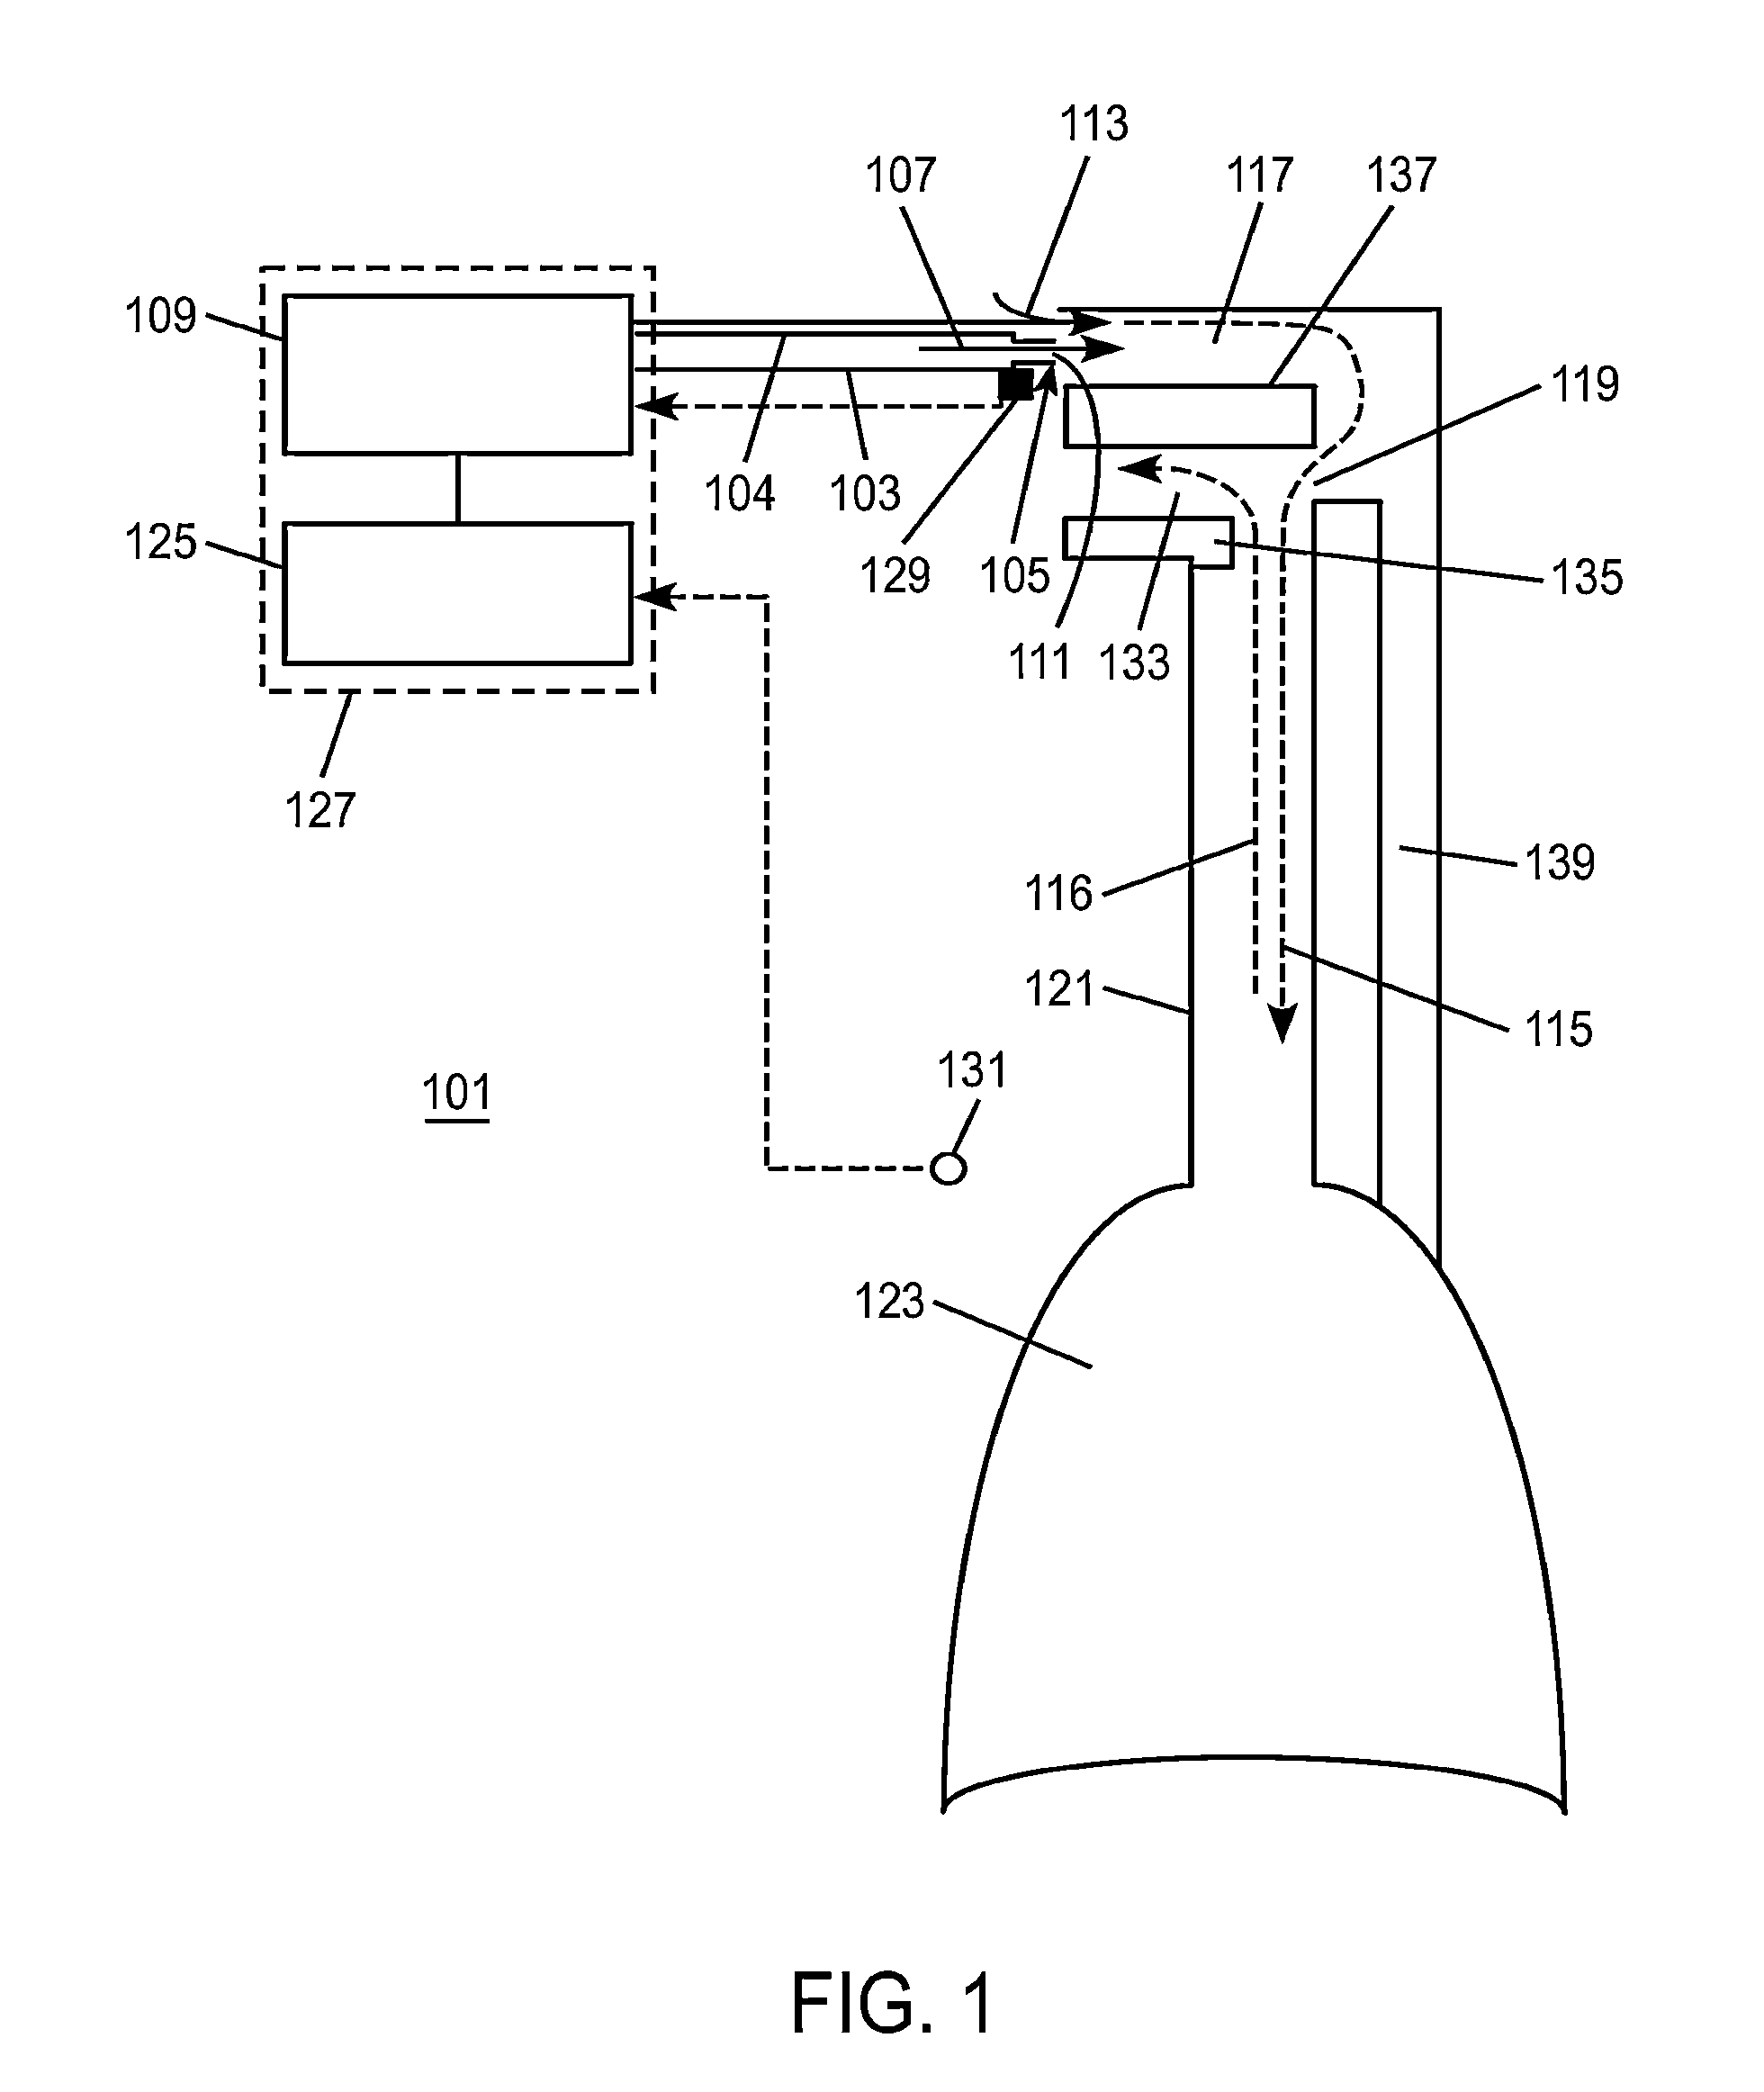 Methods, Systems and Devices for Non-Invasive Open Ventilation For Providing Ventilation Support